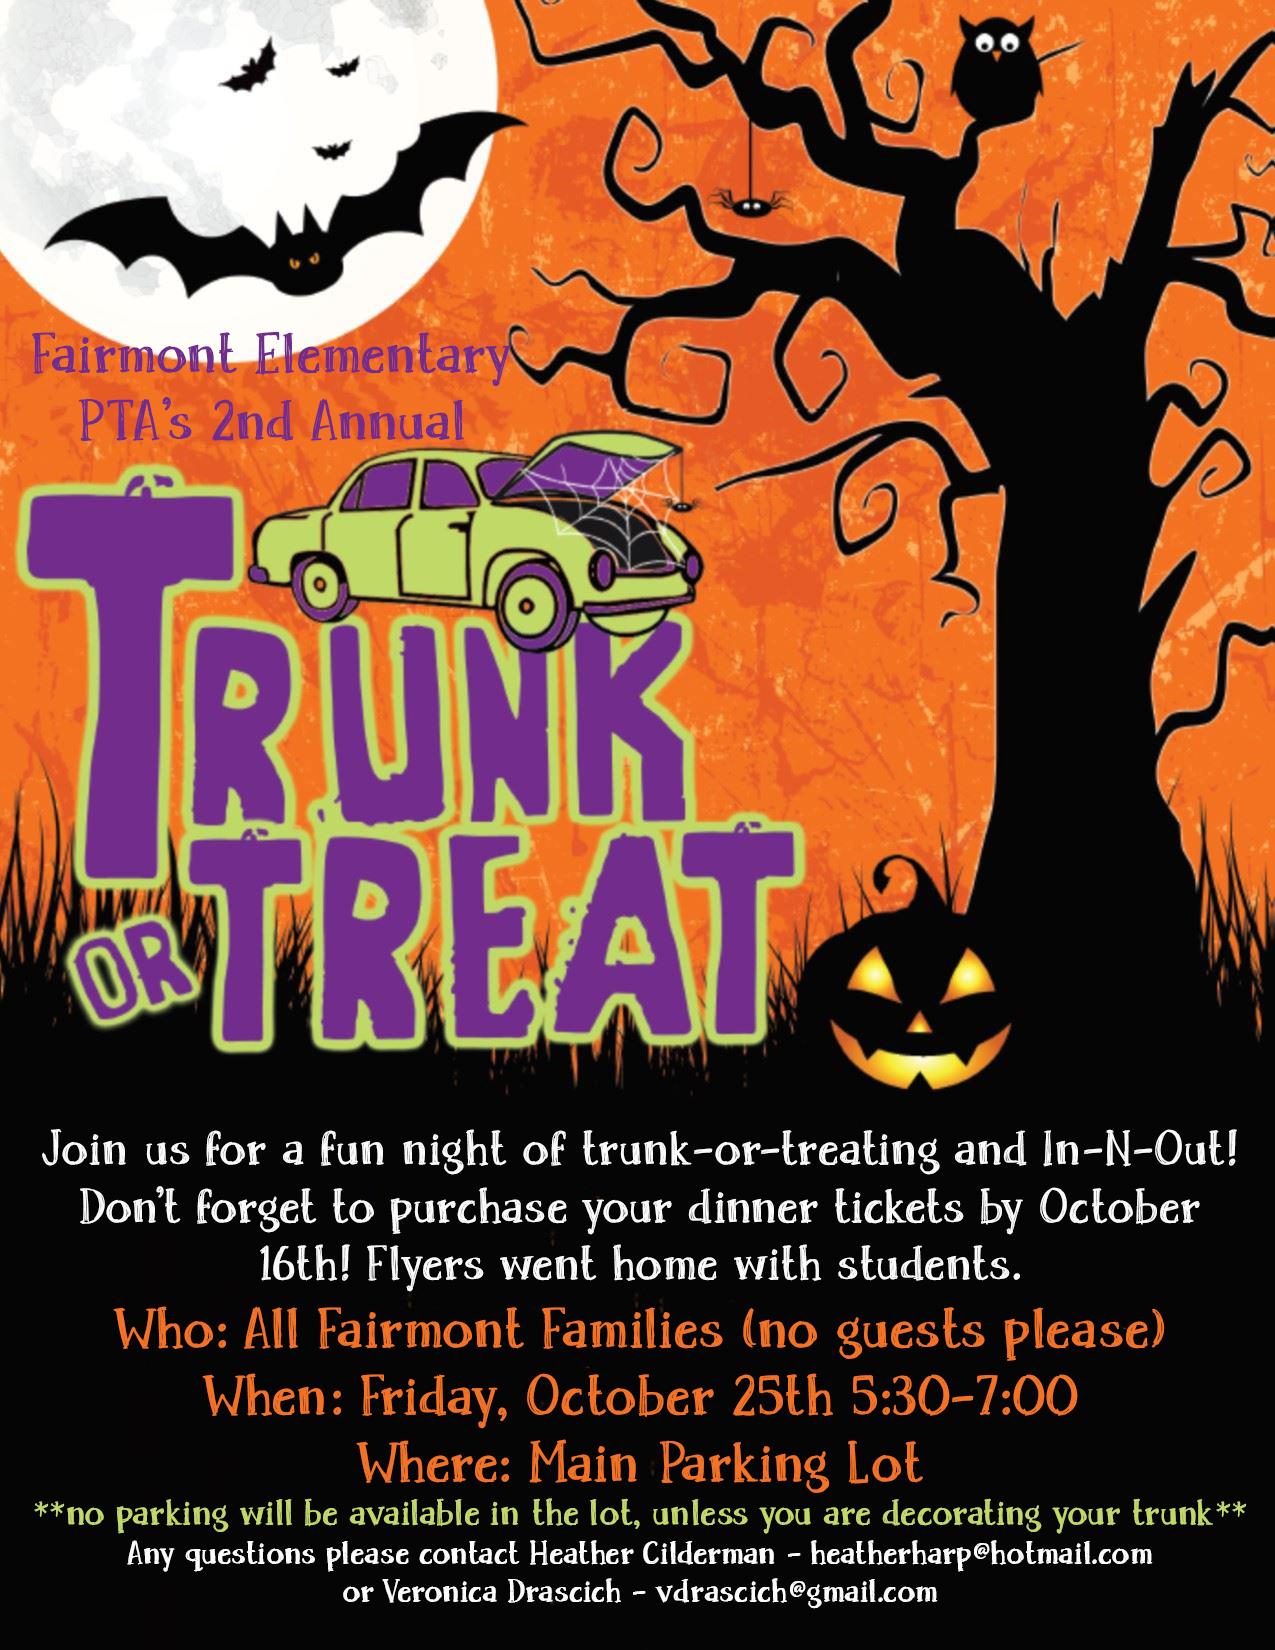 Fairmont's 2nd Annual Trunk-or-Treat on October 25